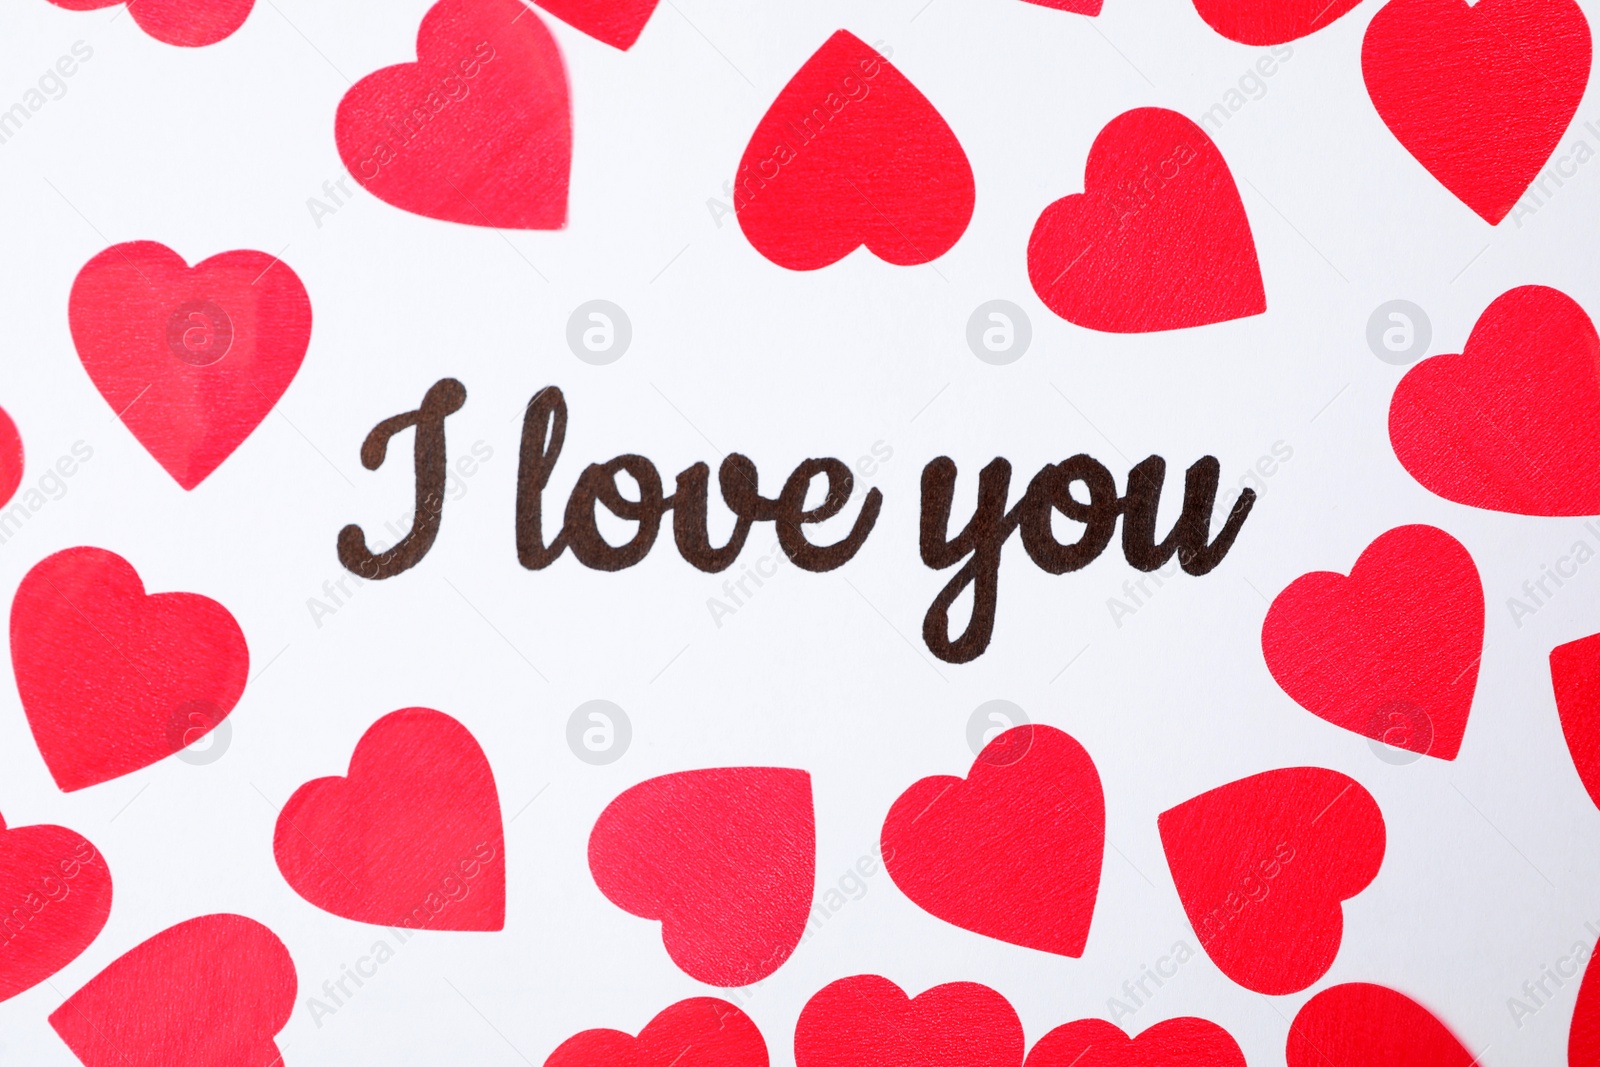 Photo of Text I Love You and red hearts on white background